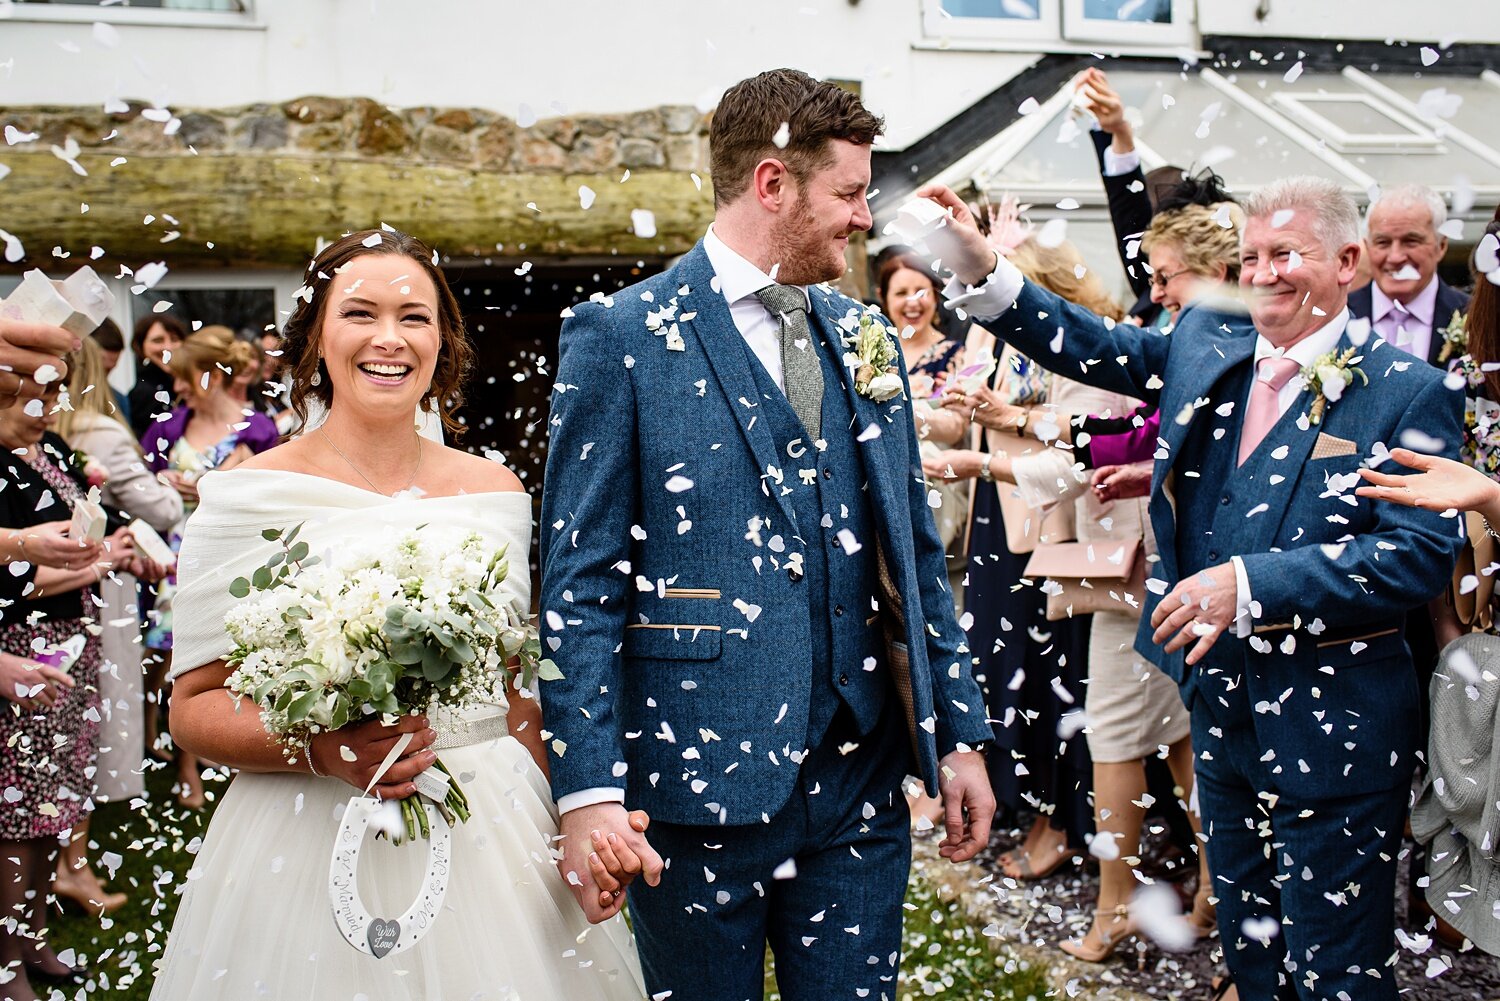 Guests throw confetti at Oxwich Bay Hotel